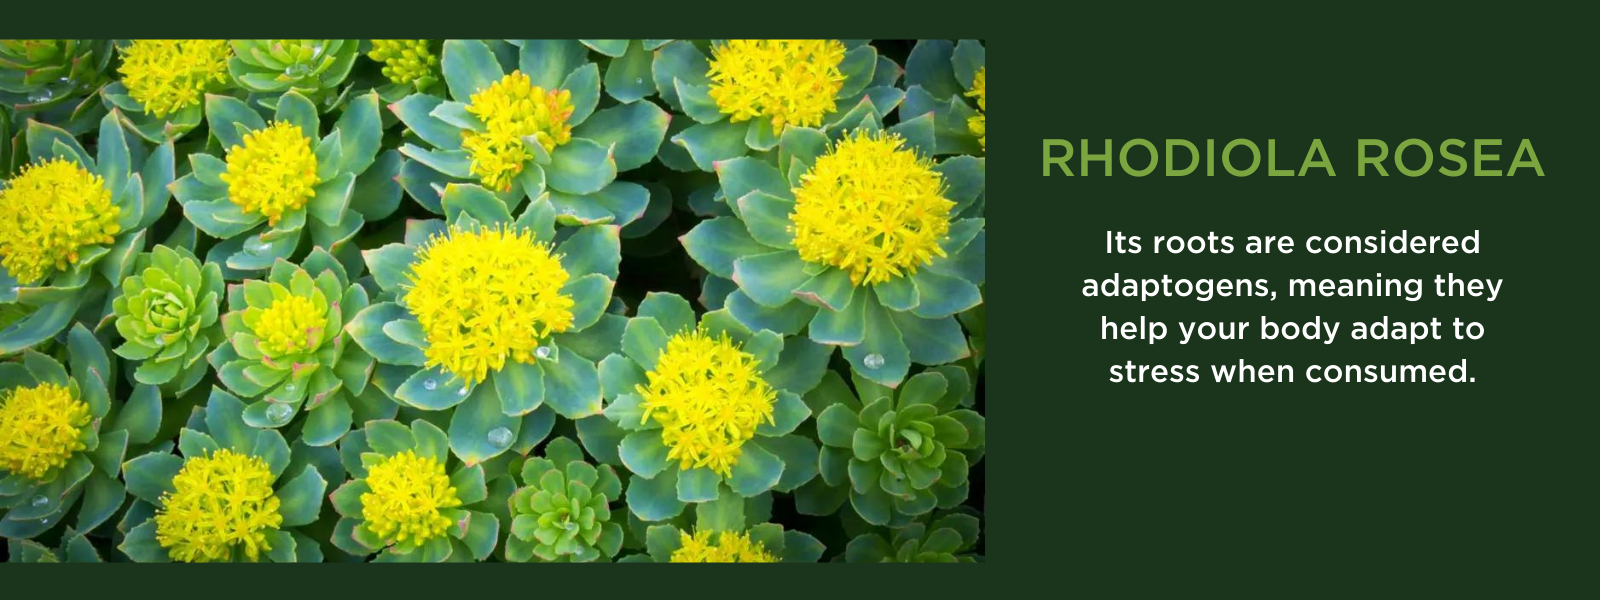 Rhodiola rosea - Health Benefits, Uses and Important Facts